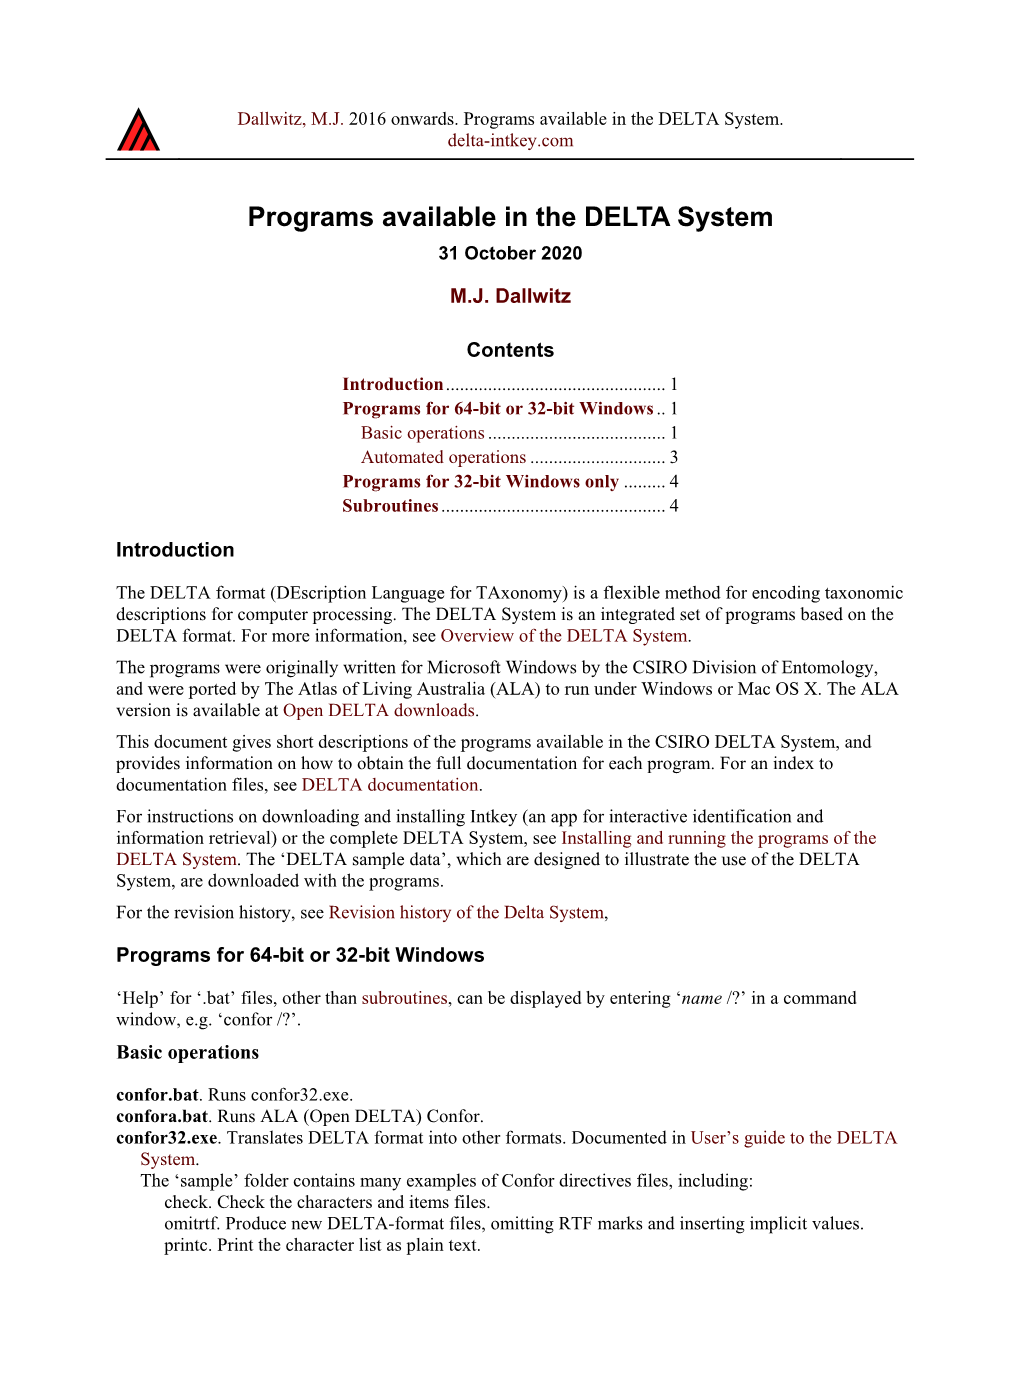 Programs Available in the DELTA System